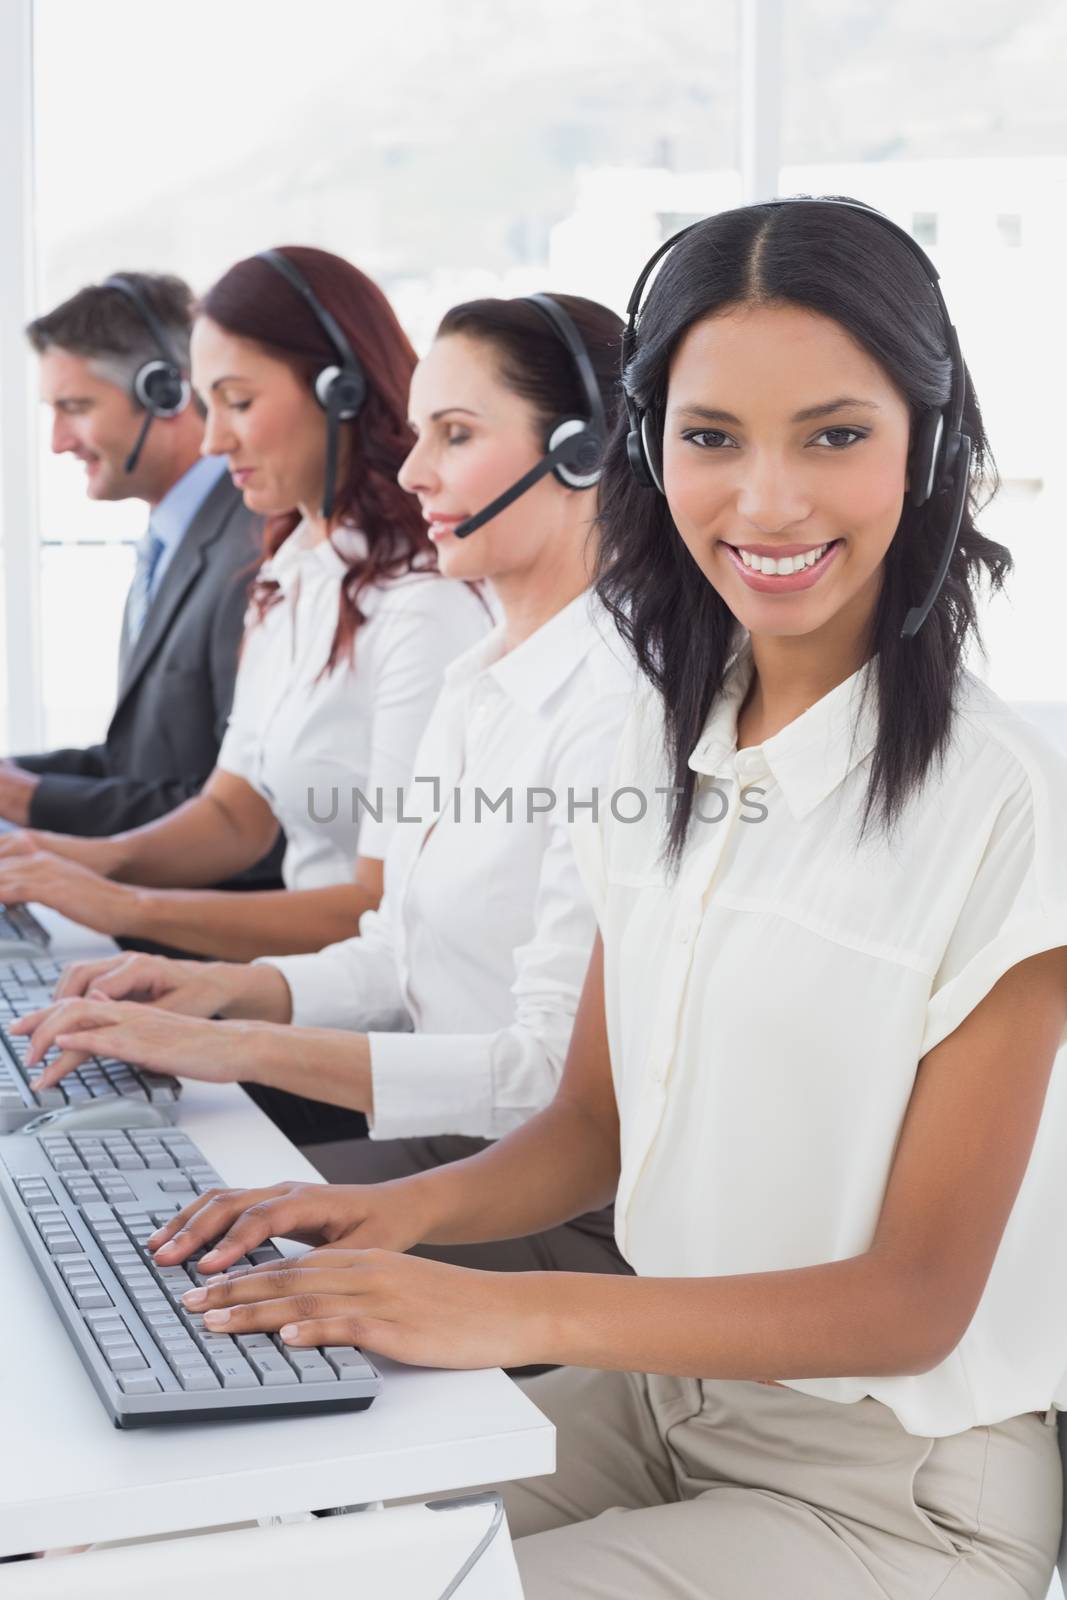 Employees typing on their computers using headsets